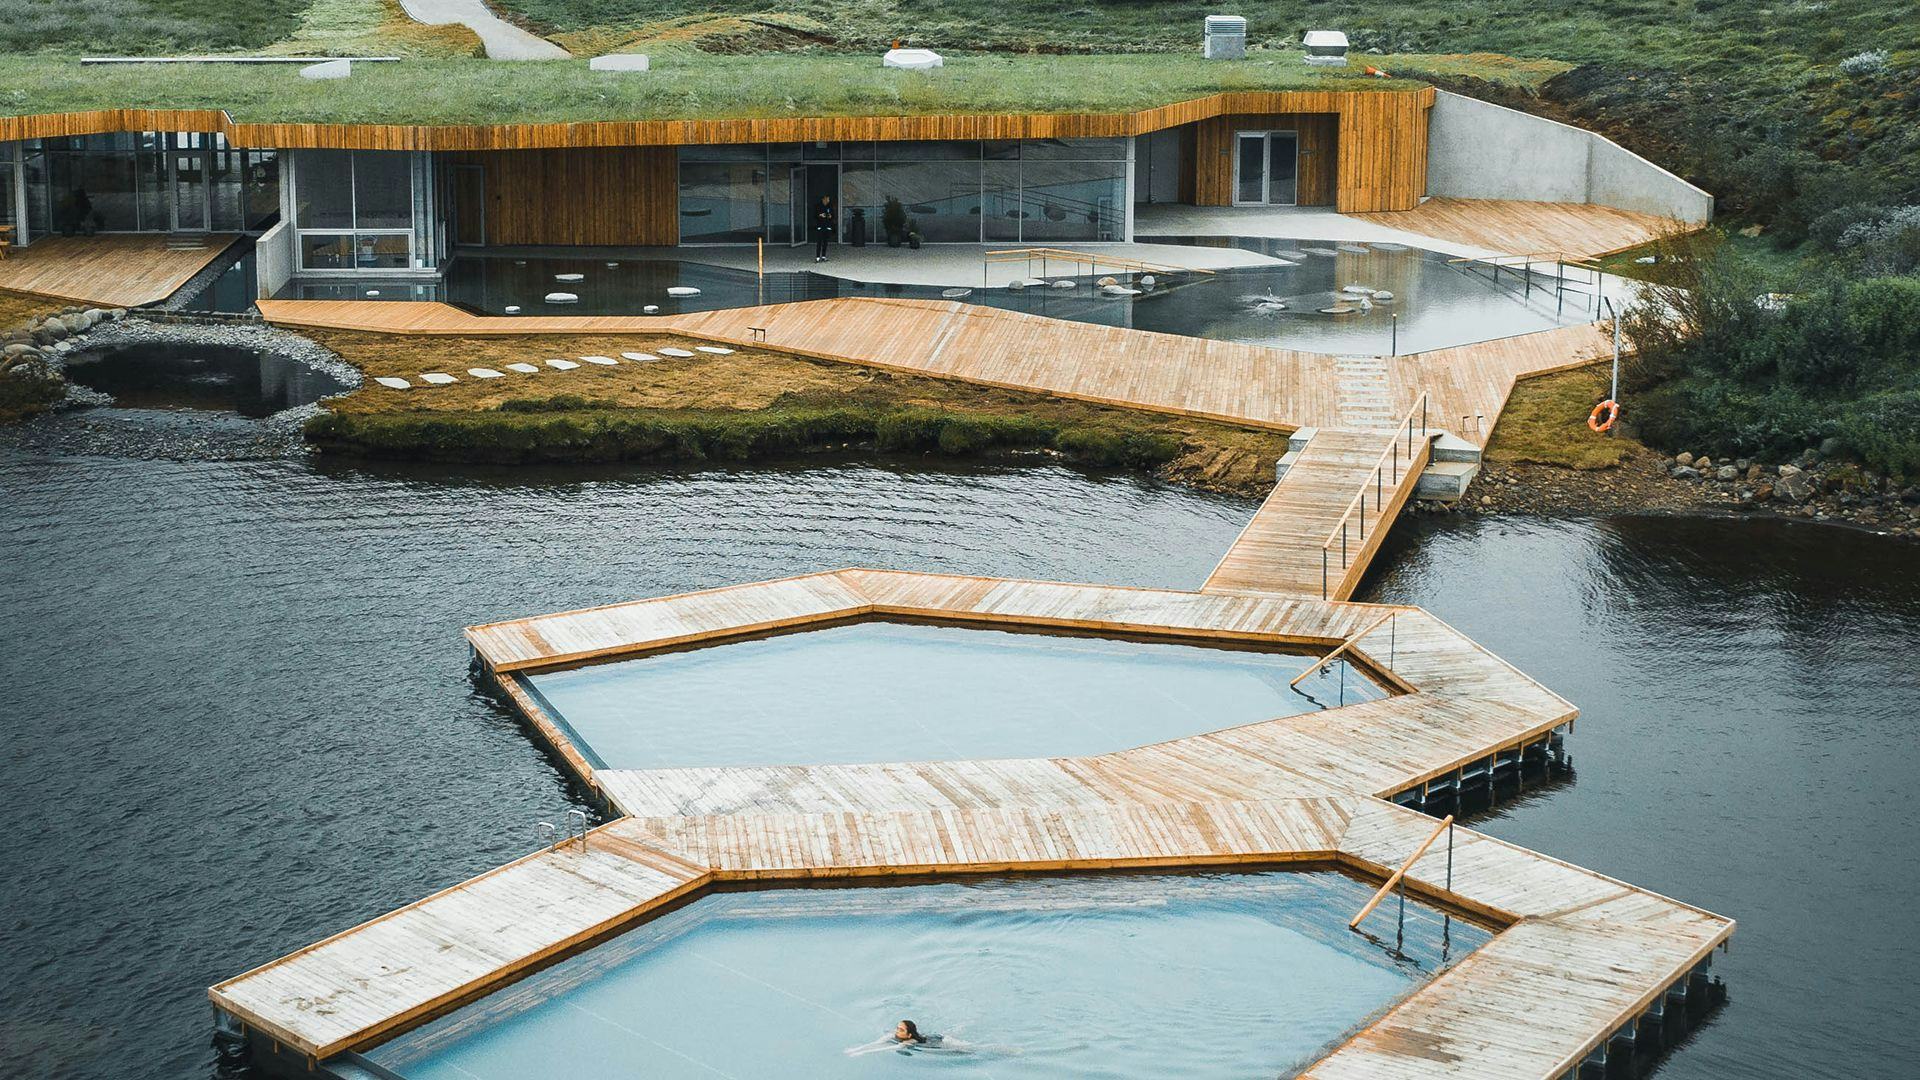 A modern geothermal bath featuring wooden walkways and pools over a body of water